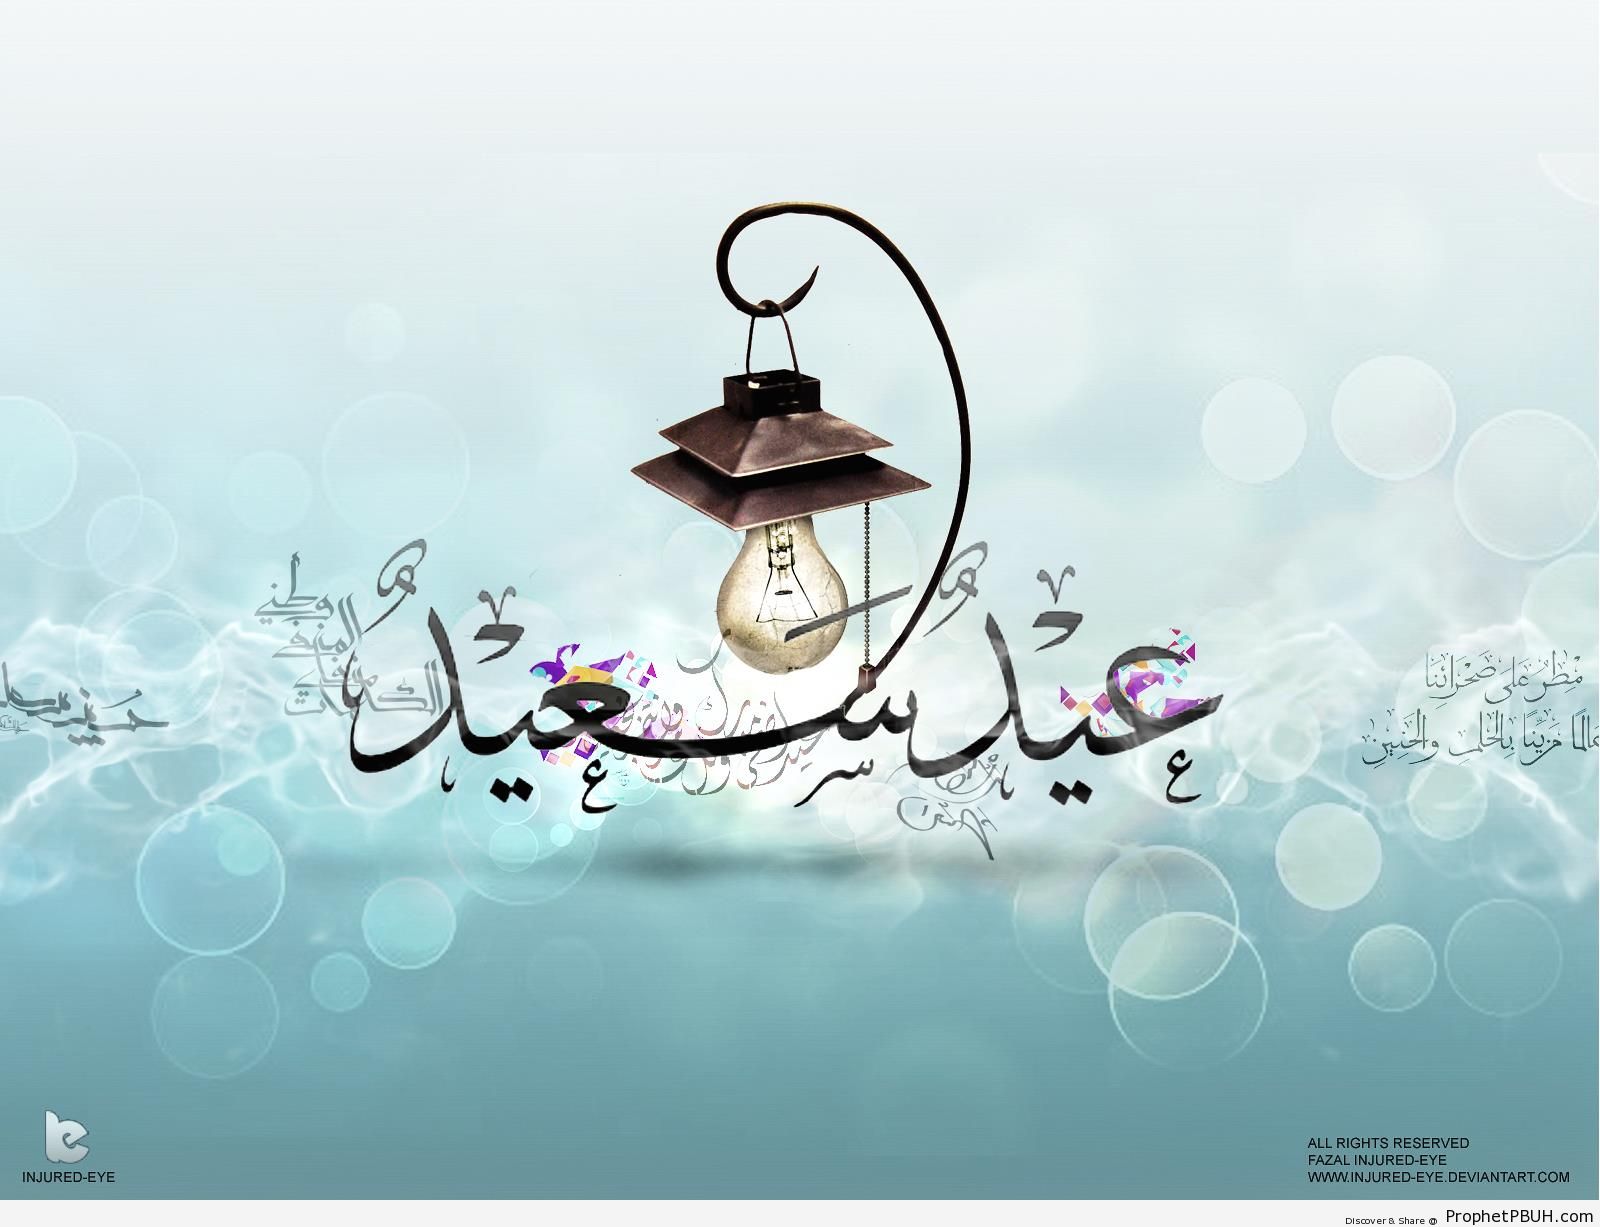 Happy Eid Greeting Calligraphy with Lamp Hanging From the Letter -S- - Drawings of Lamps 